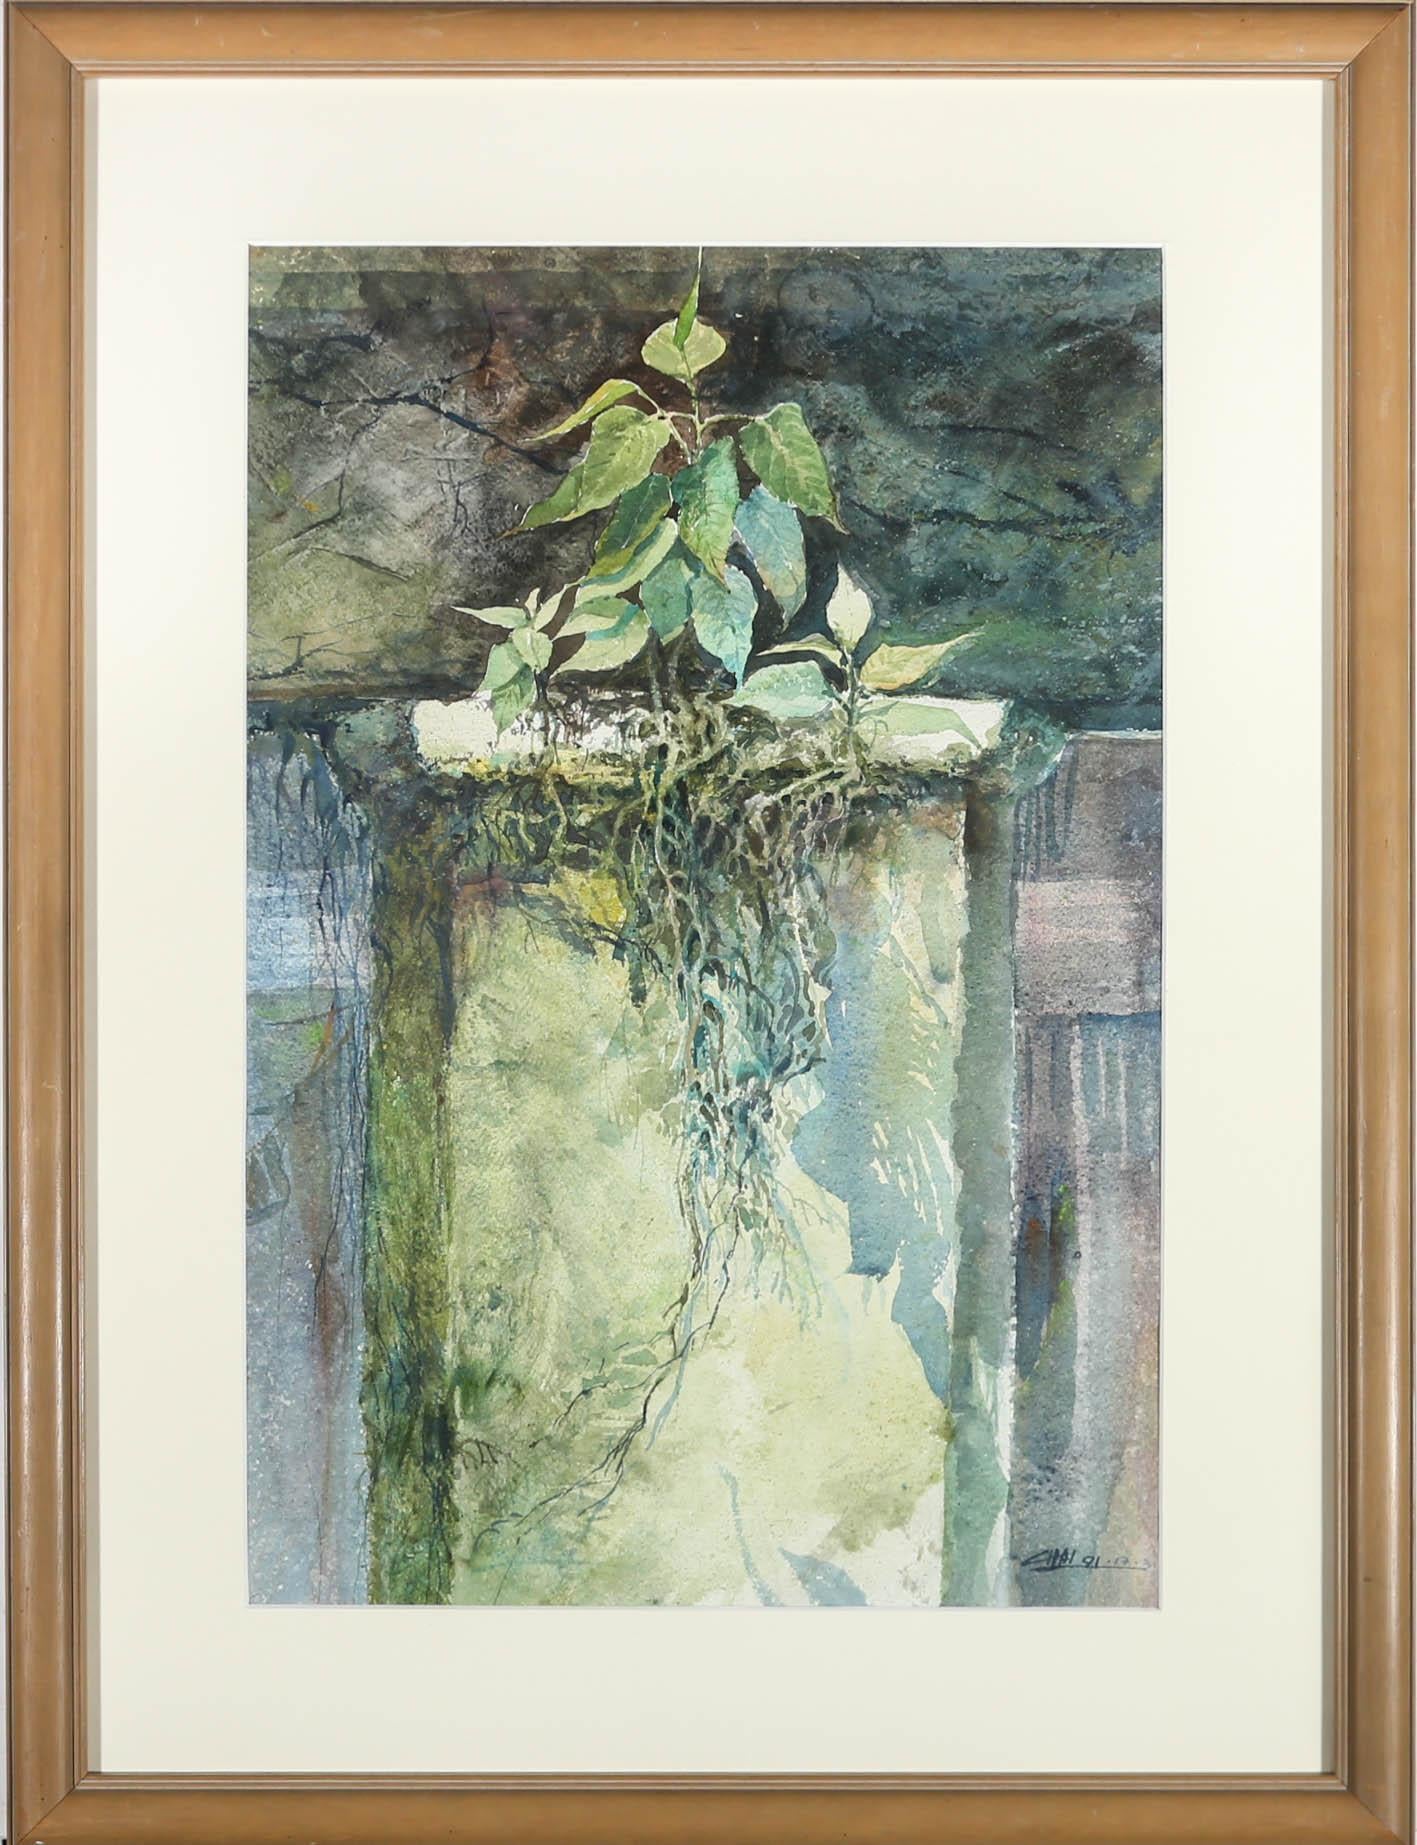 An atmospheric watercolour study depicting a plant growing from the cracks of a building. Part of a pair of watercolours by the same artist. Signed and dated to the lower right. Artist label to the reverse. Chai Seng Chai is part of the Malaysian